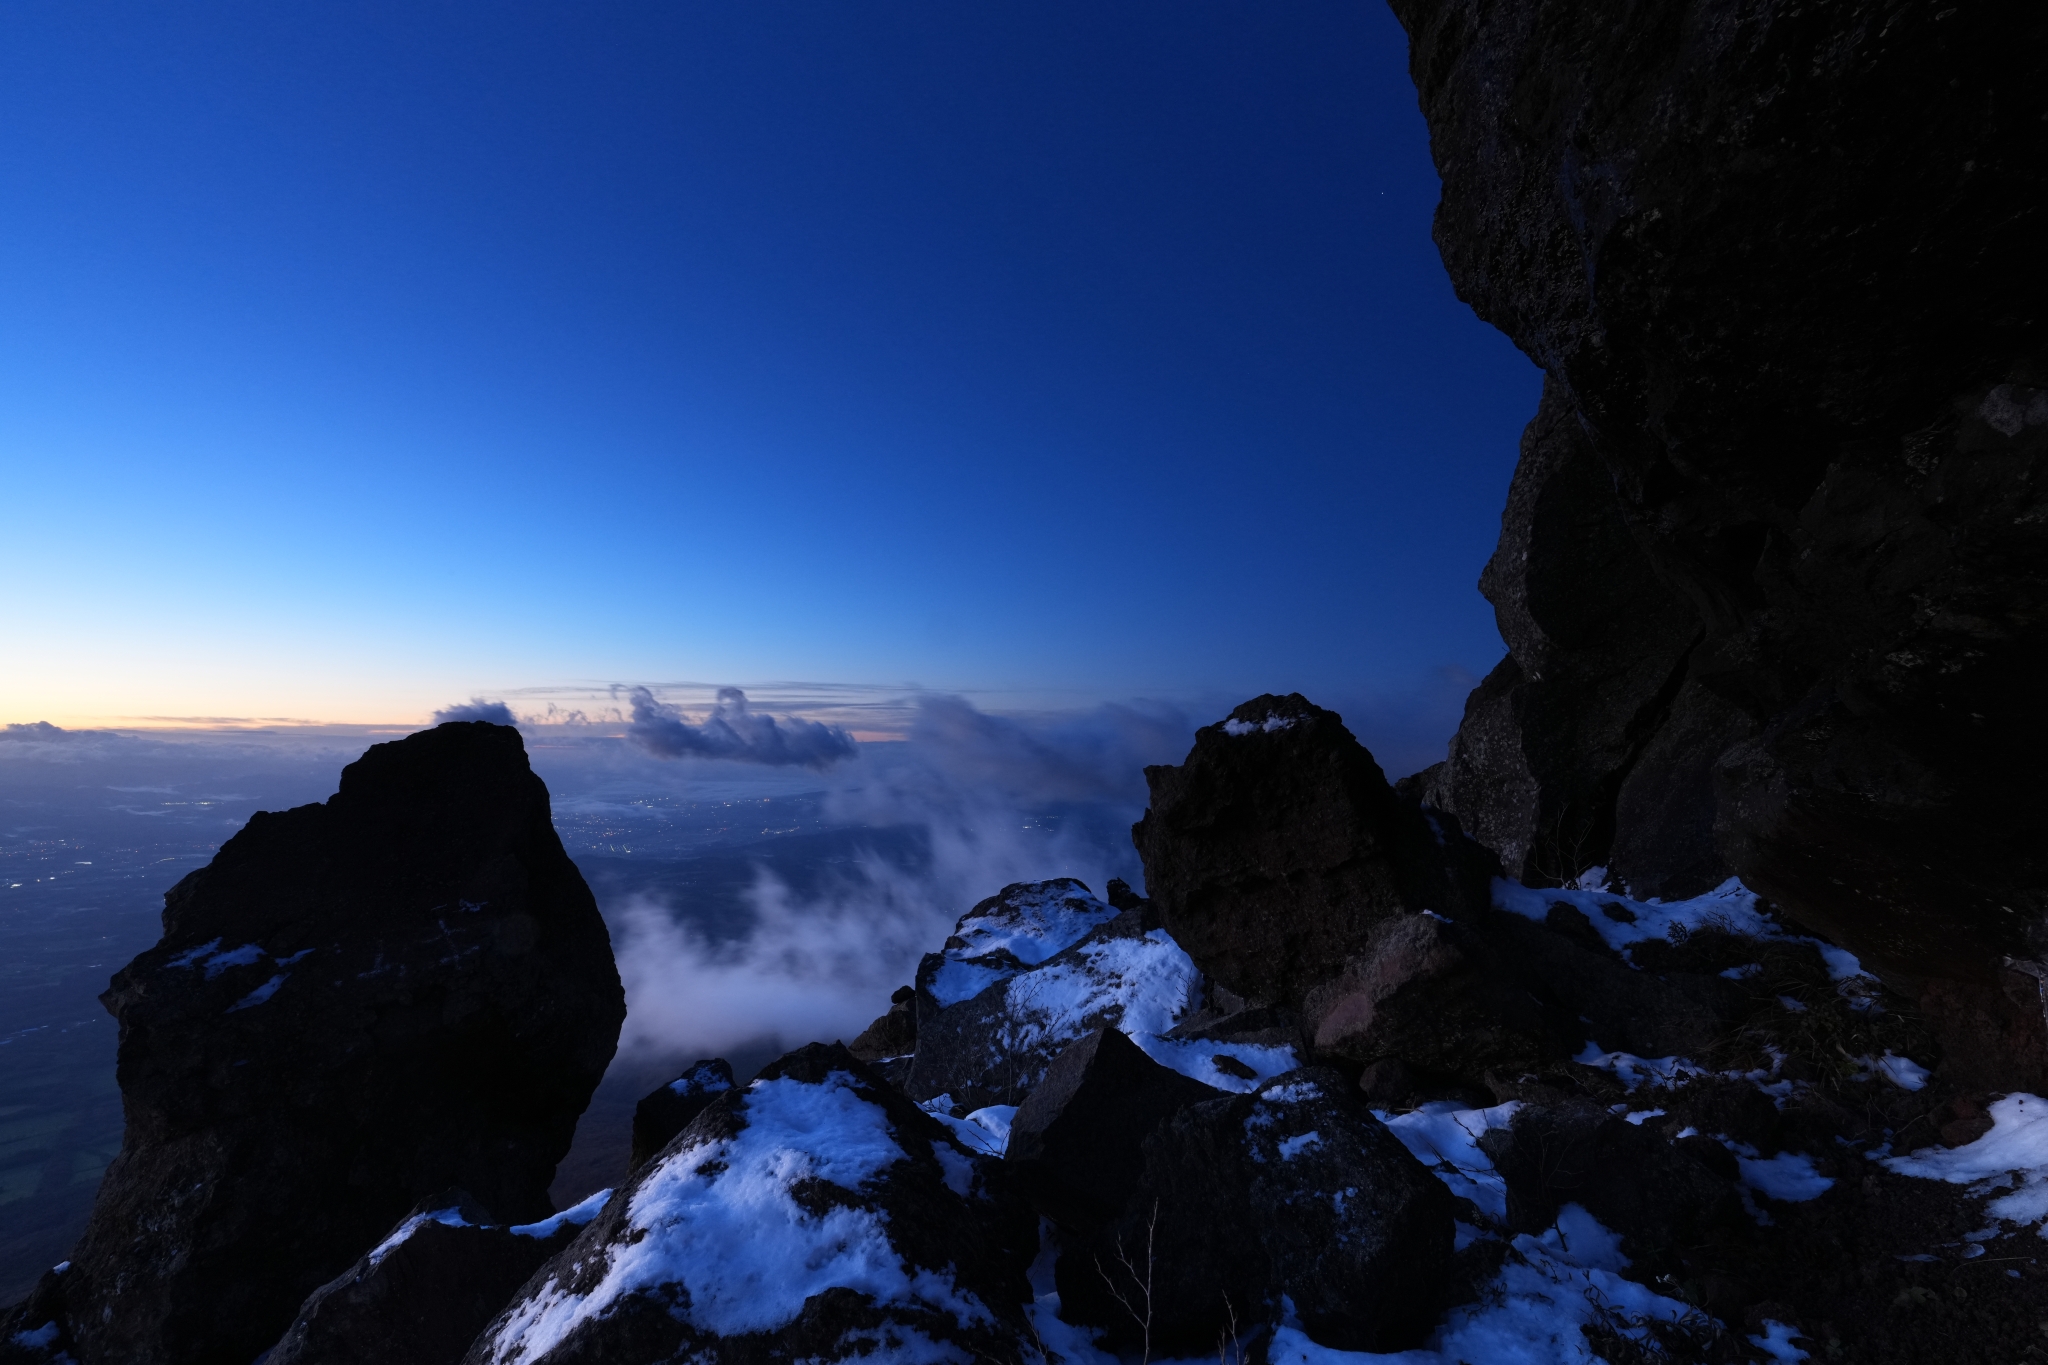 A spectacular view from a rocky area covered with snow at a high altitude.